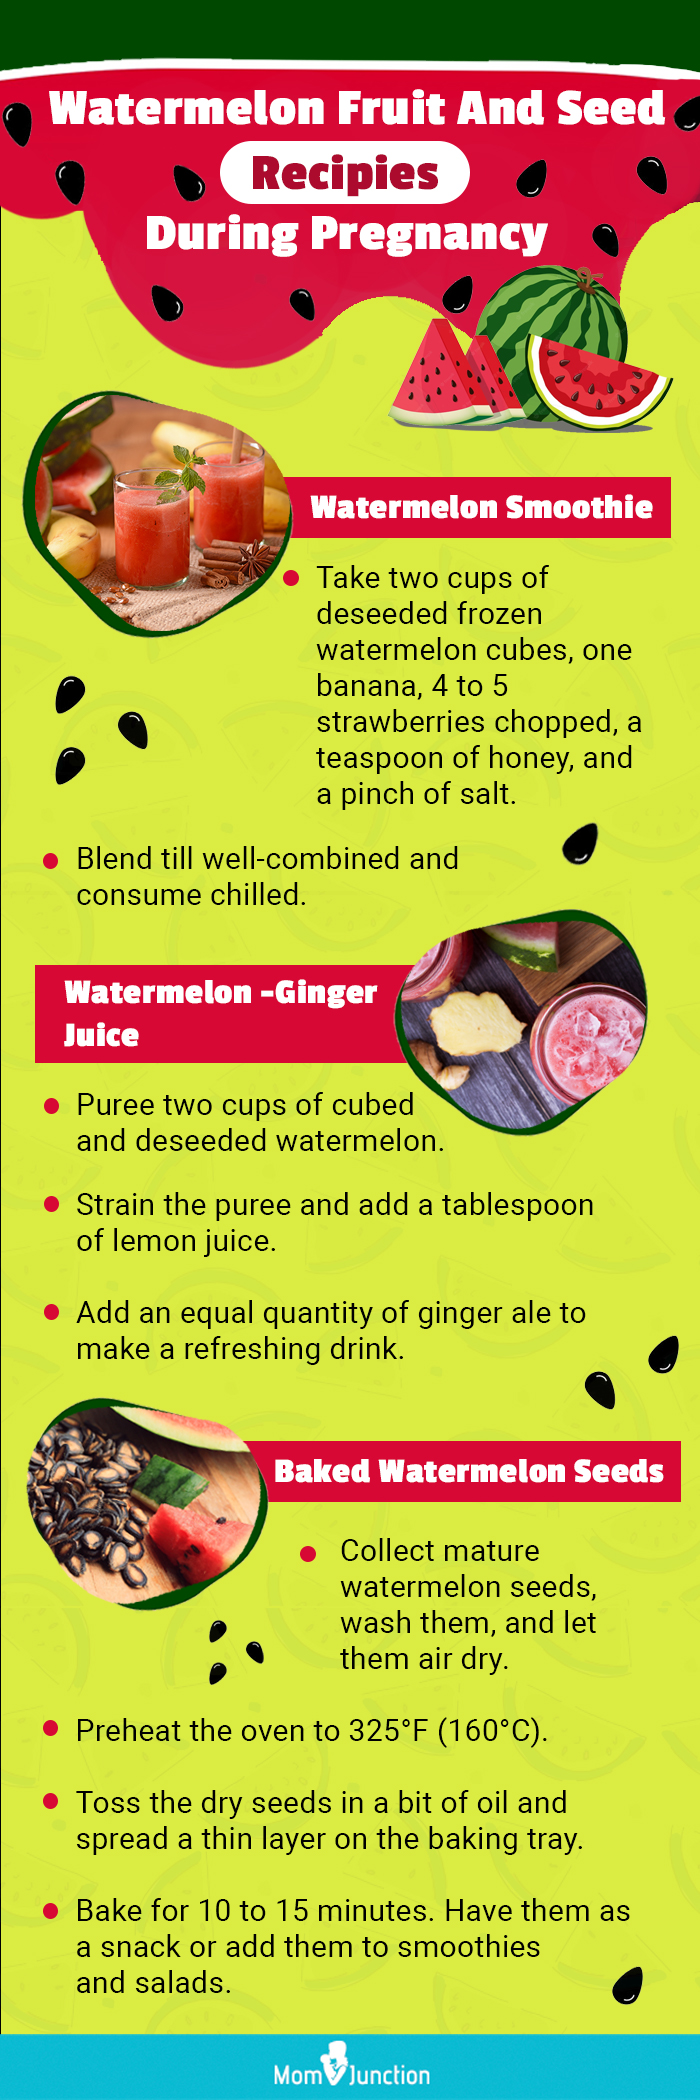 watermelon fruit and seed recipes during pregnancy (infographic)